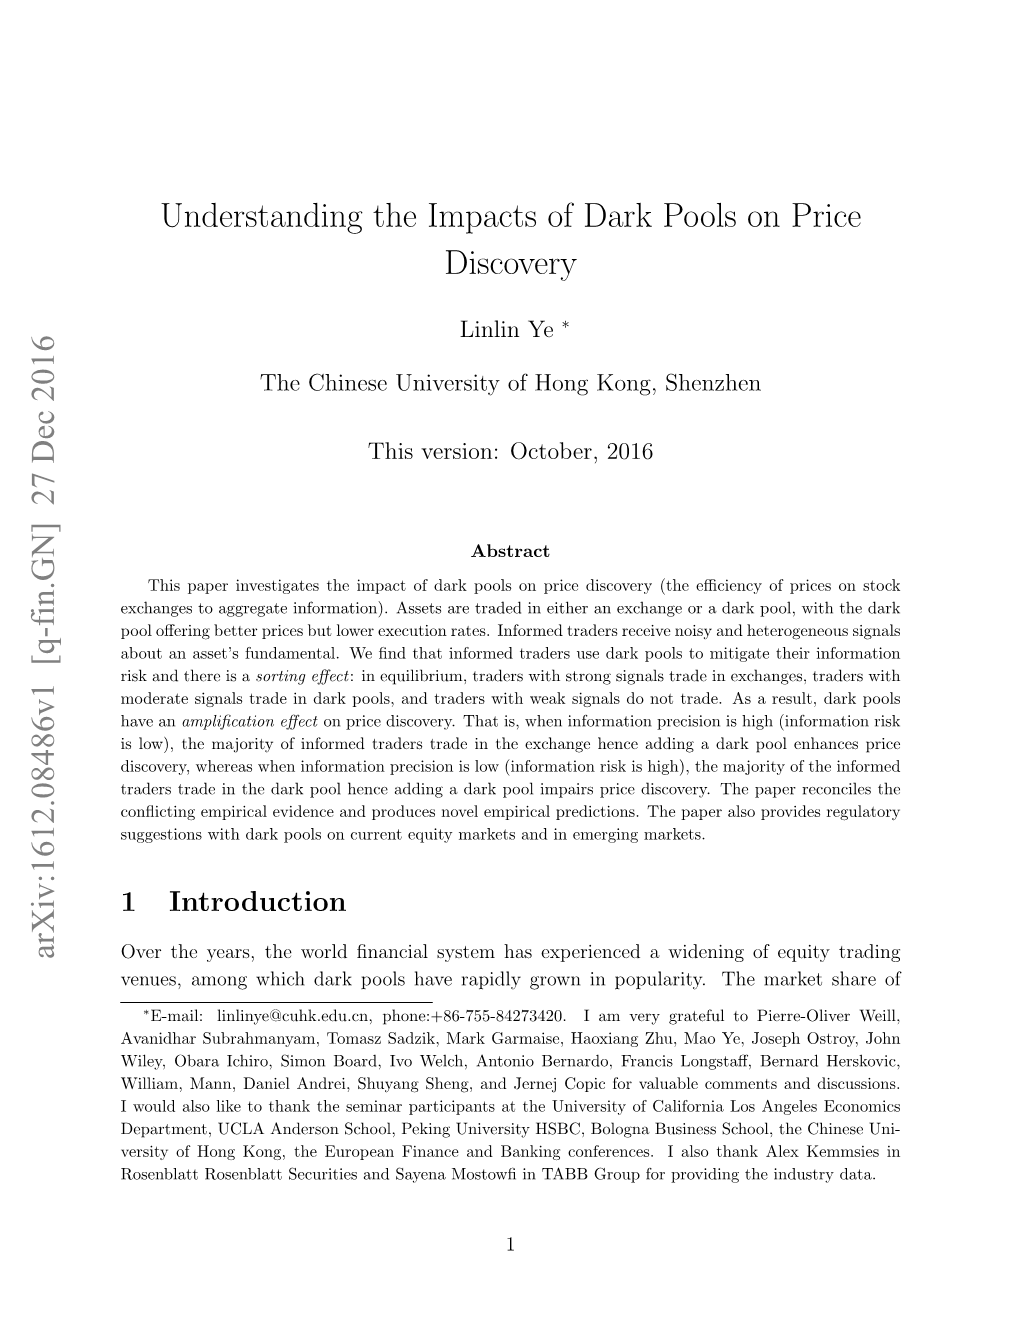 Understanding the Impacts of Dark Pools on Price Discovery Arxiv